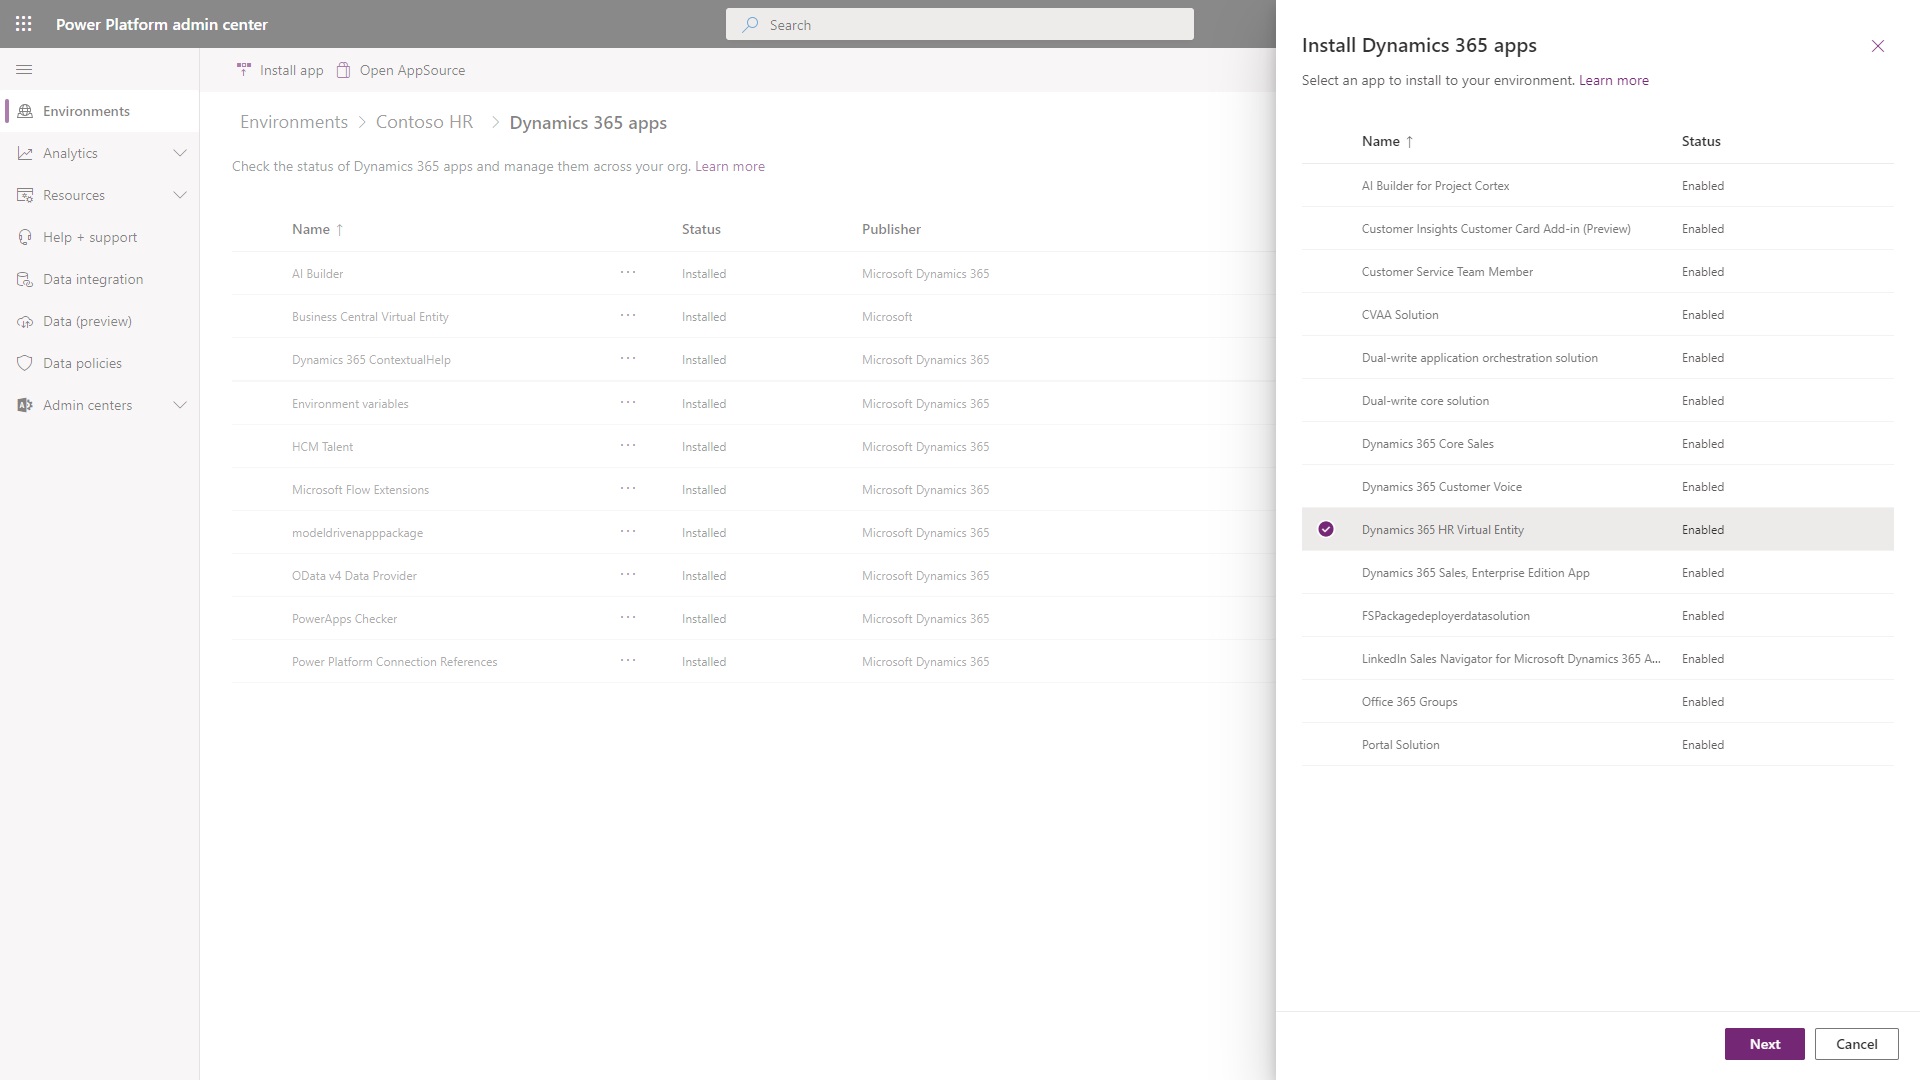 Install the Dynamics 365 HR Virtual Table app from the Power Platform admin center.